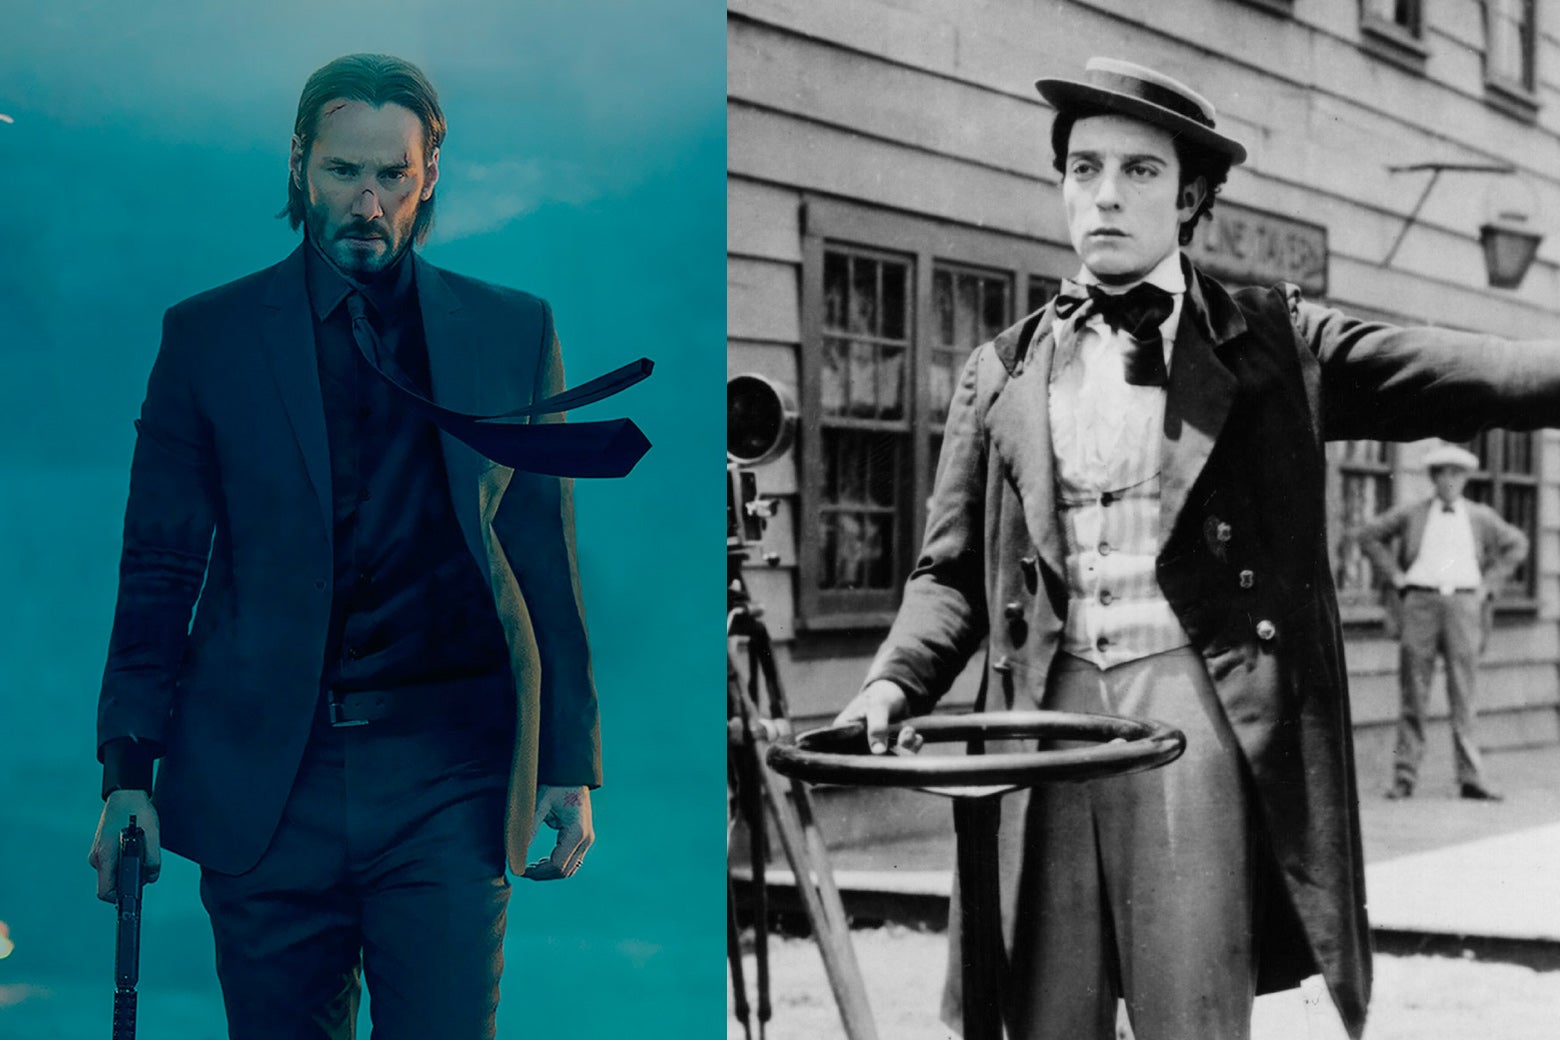 On the left, Keanu Reeves, stonefaced, in a suit. On the right, Buster Keaton, stonefaced, in a suit. OK he's also wearing a porkpie hat.